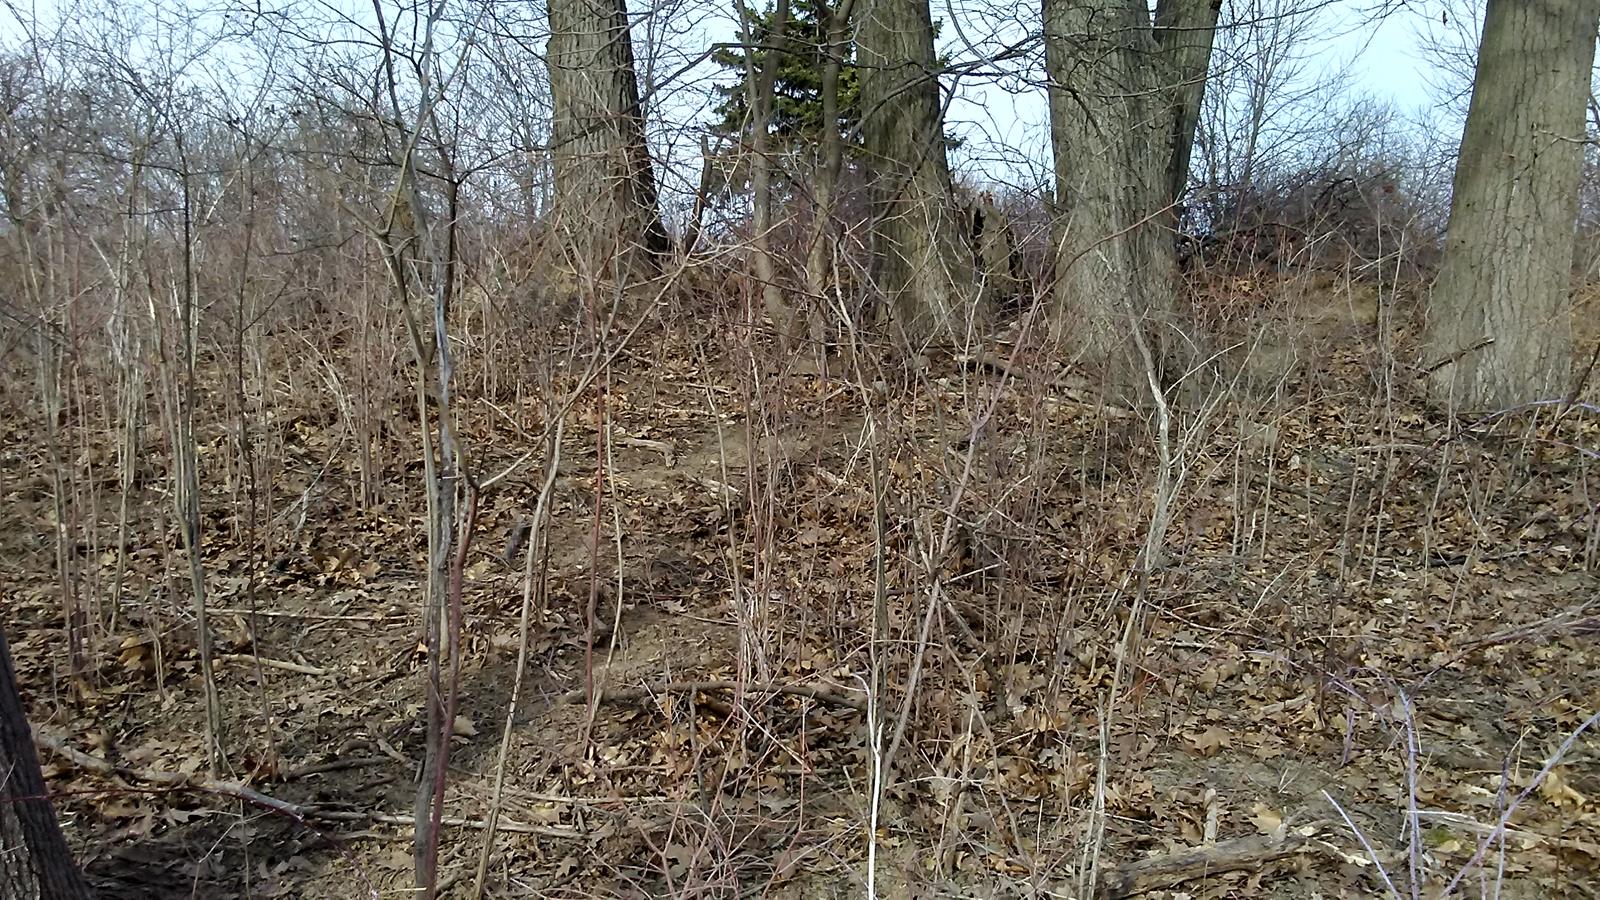 these native red oaks area ware saved from invasive buckthorn.